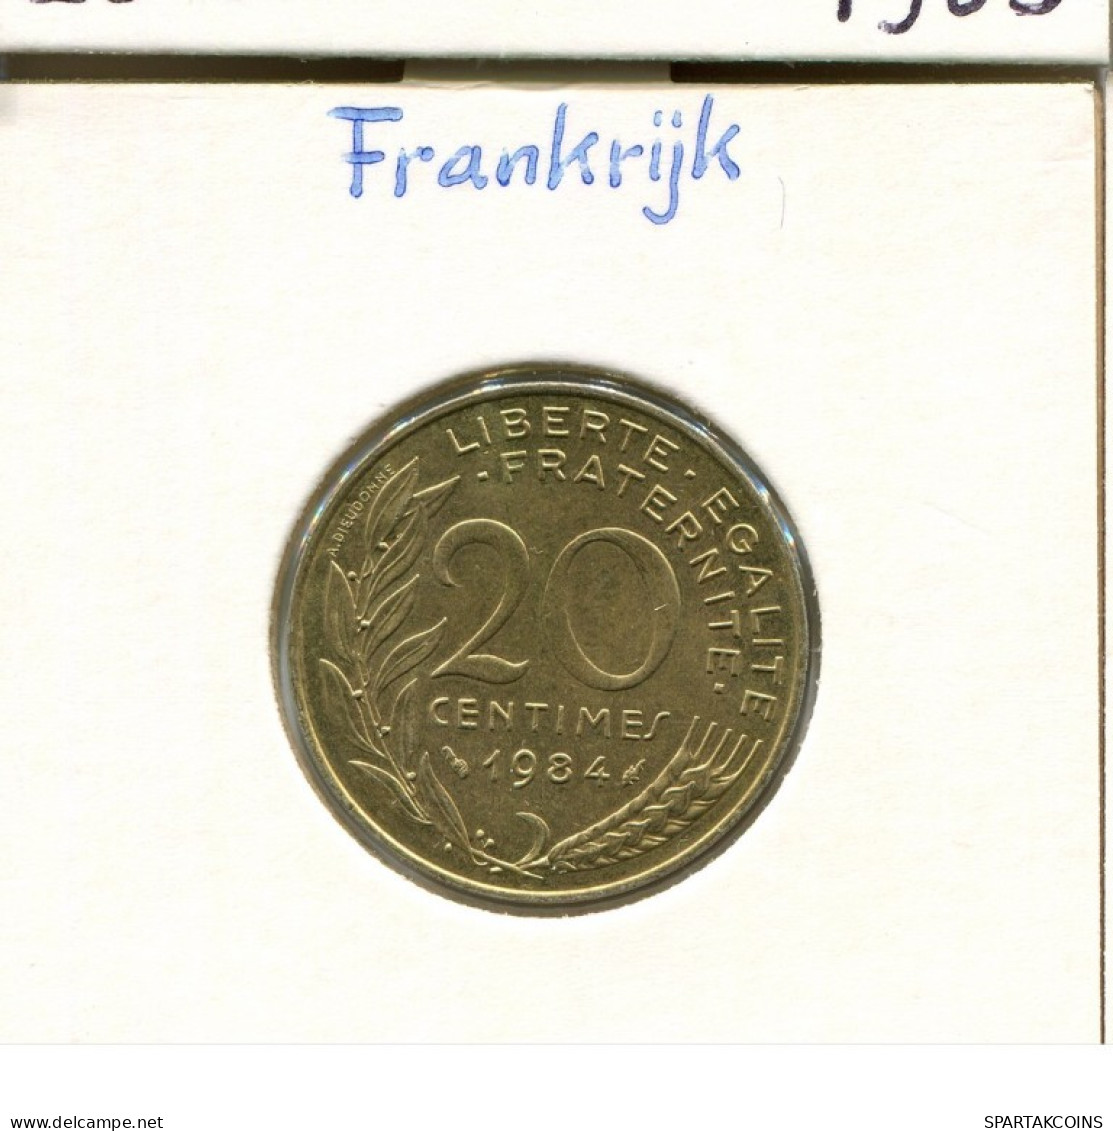 20 CENTIMES 1984 FRANCE Coin French Coin #AM180.U.A - 20 Centimes